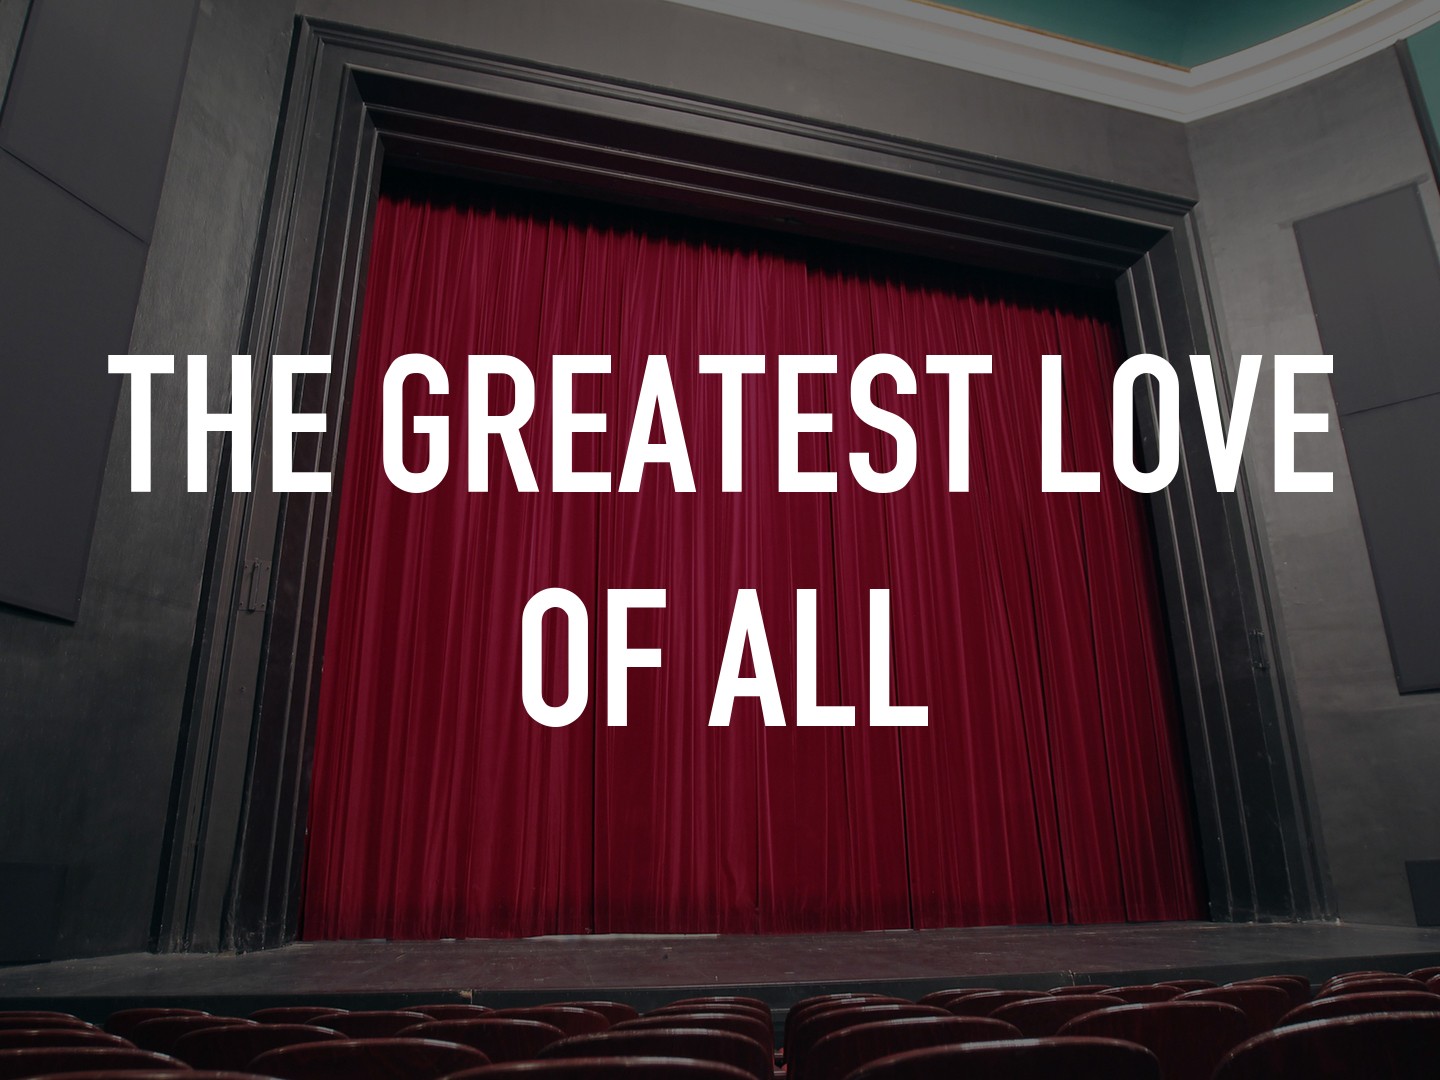 The Greatest Love of All - Wikipedia